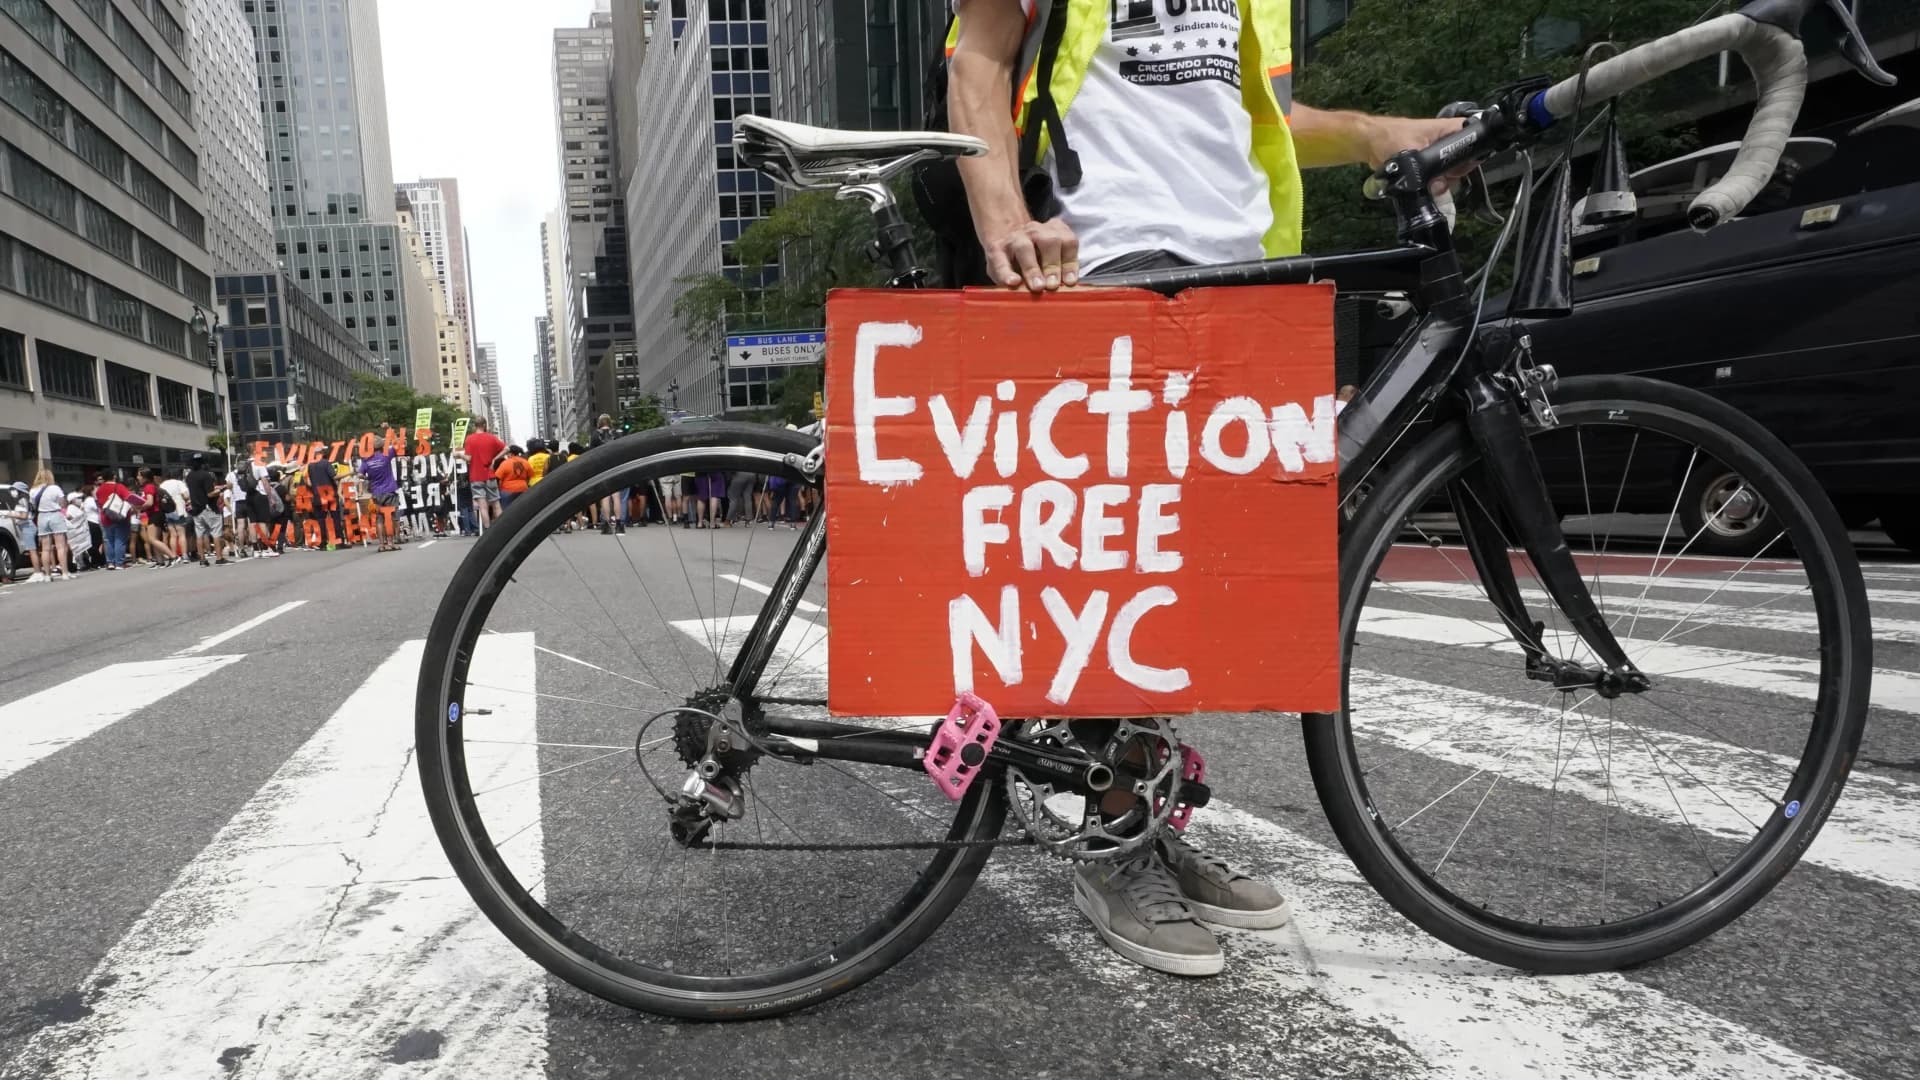 New York to end eviction ban, reopen rent relief site